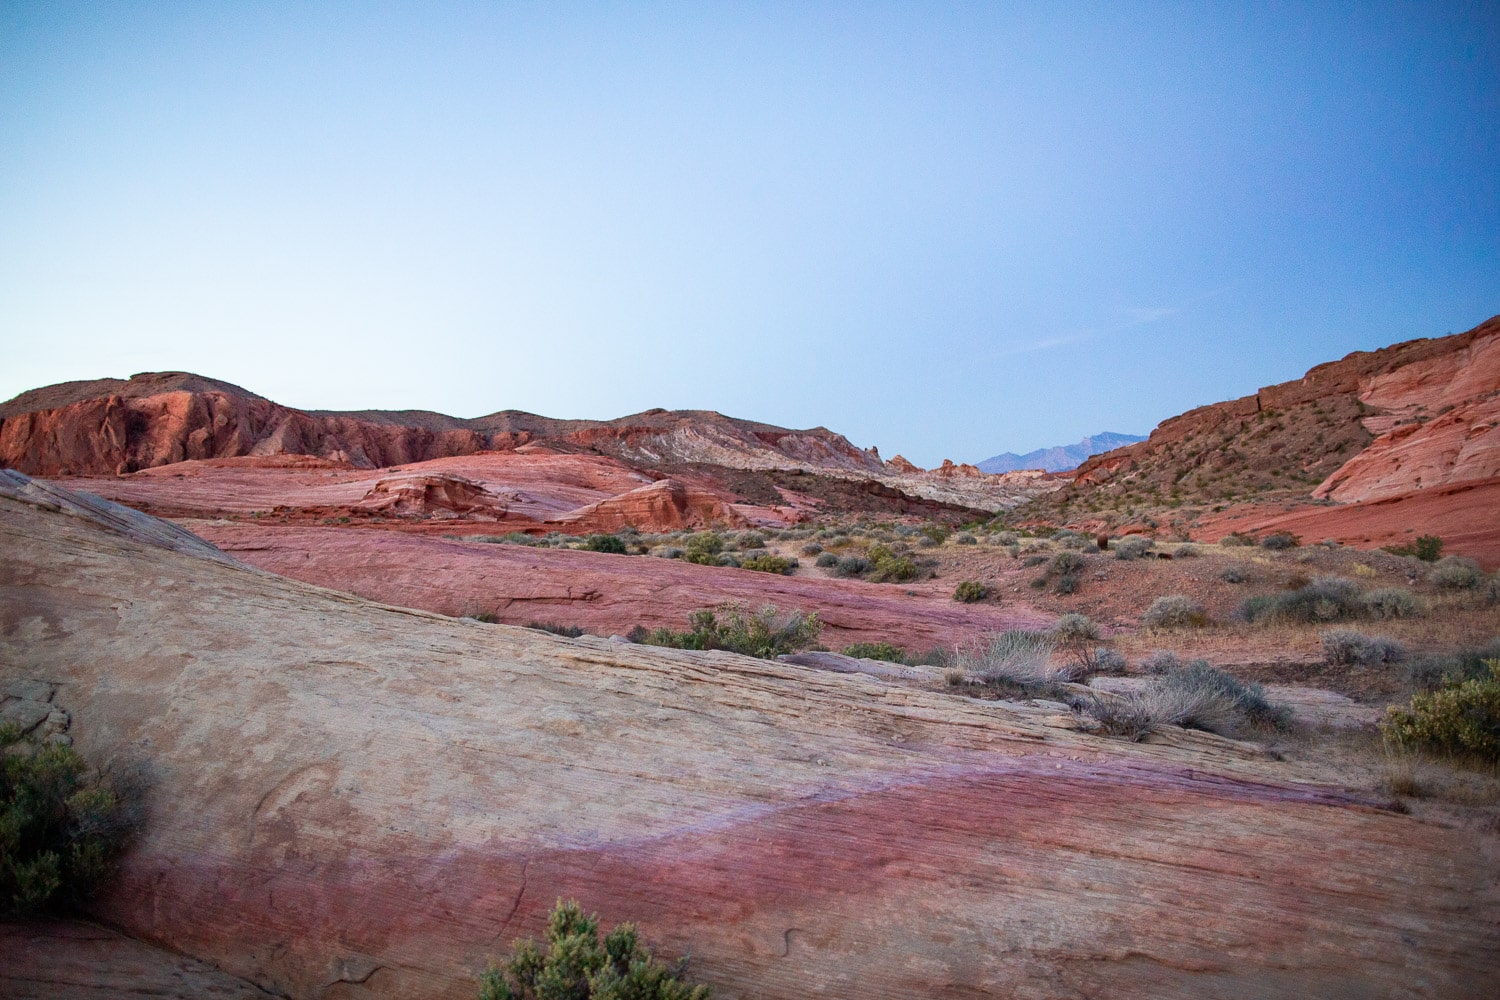 Layers of pink, white, and orange rock in the desert.